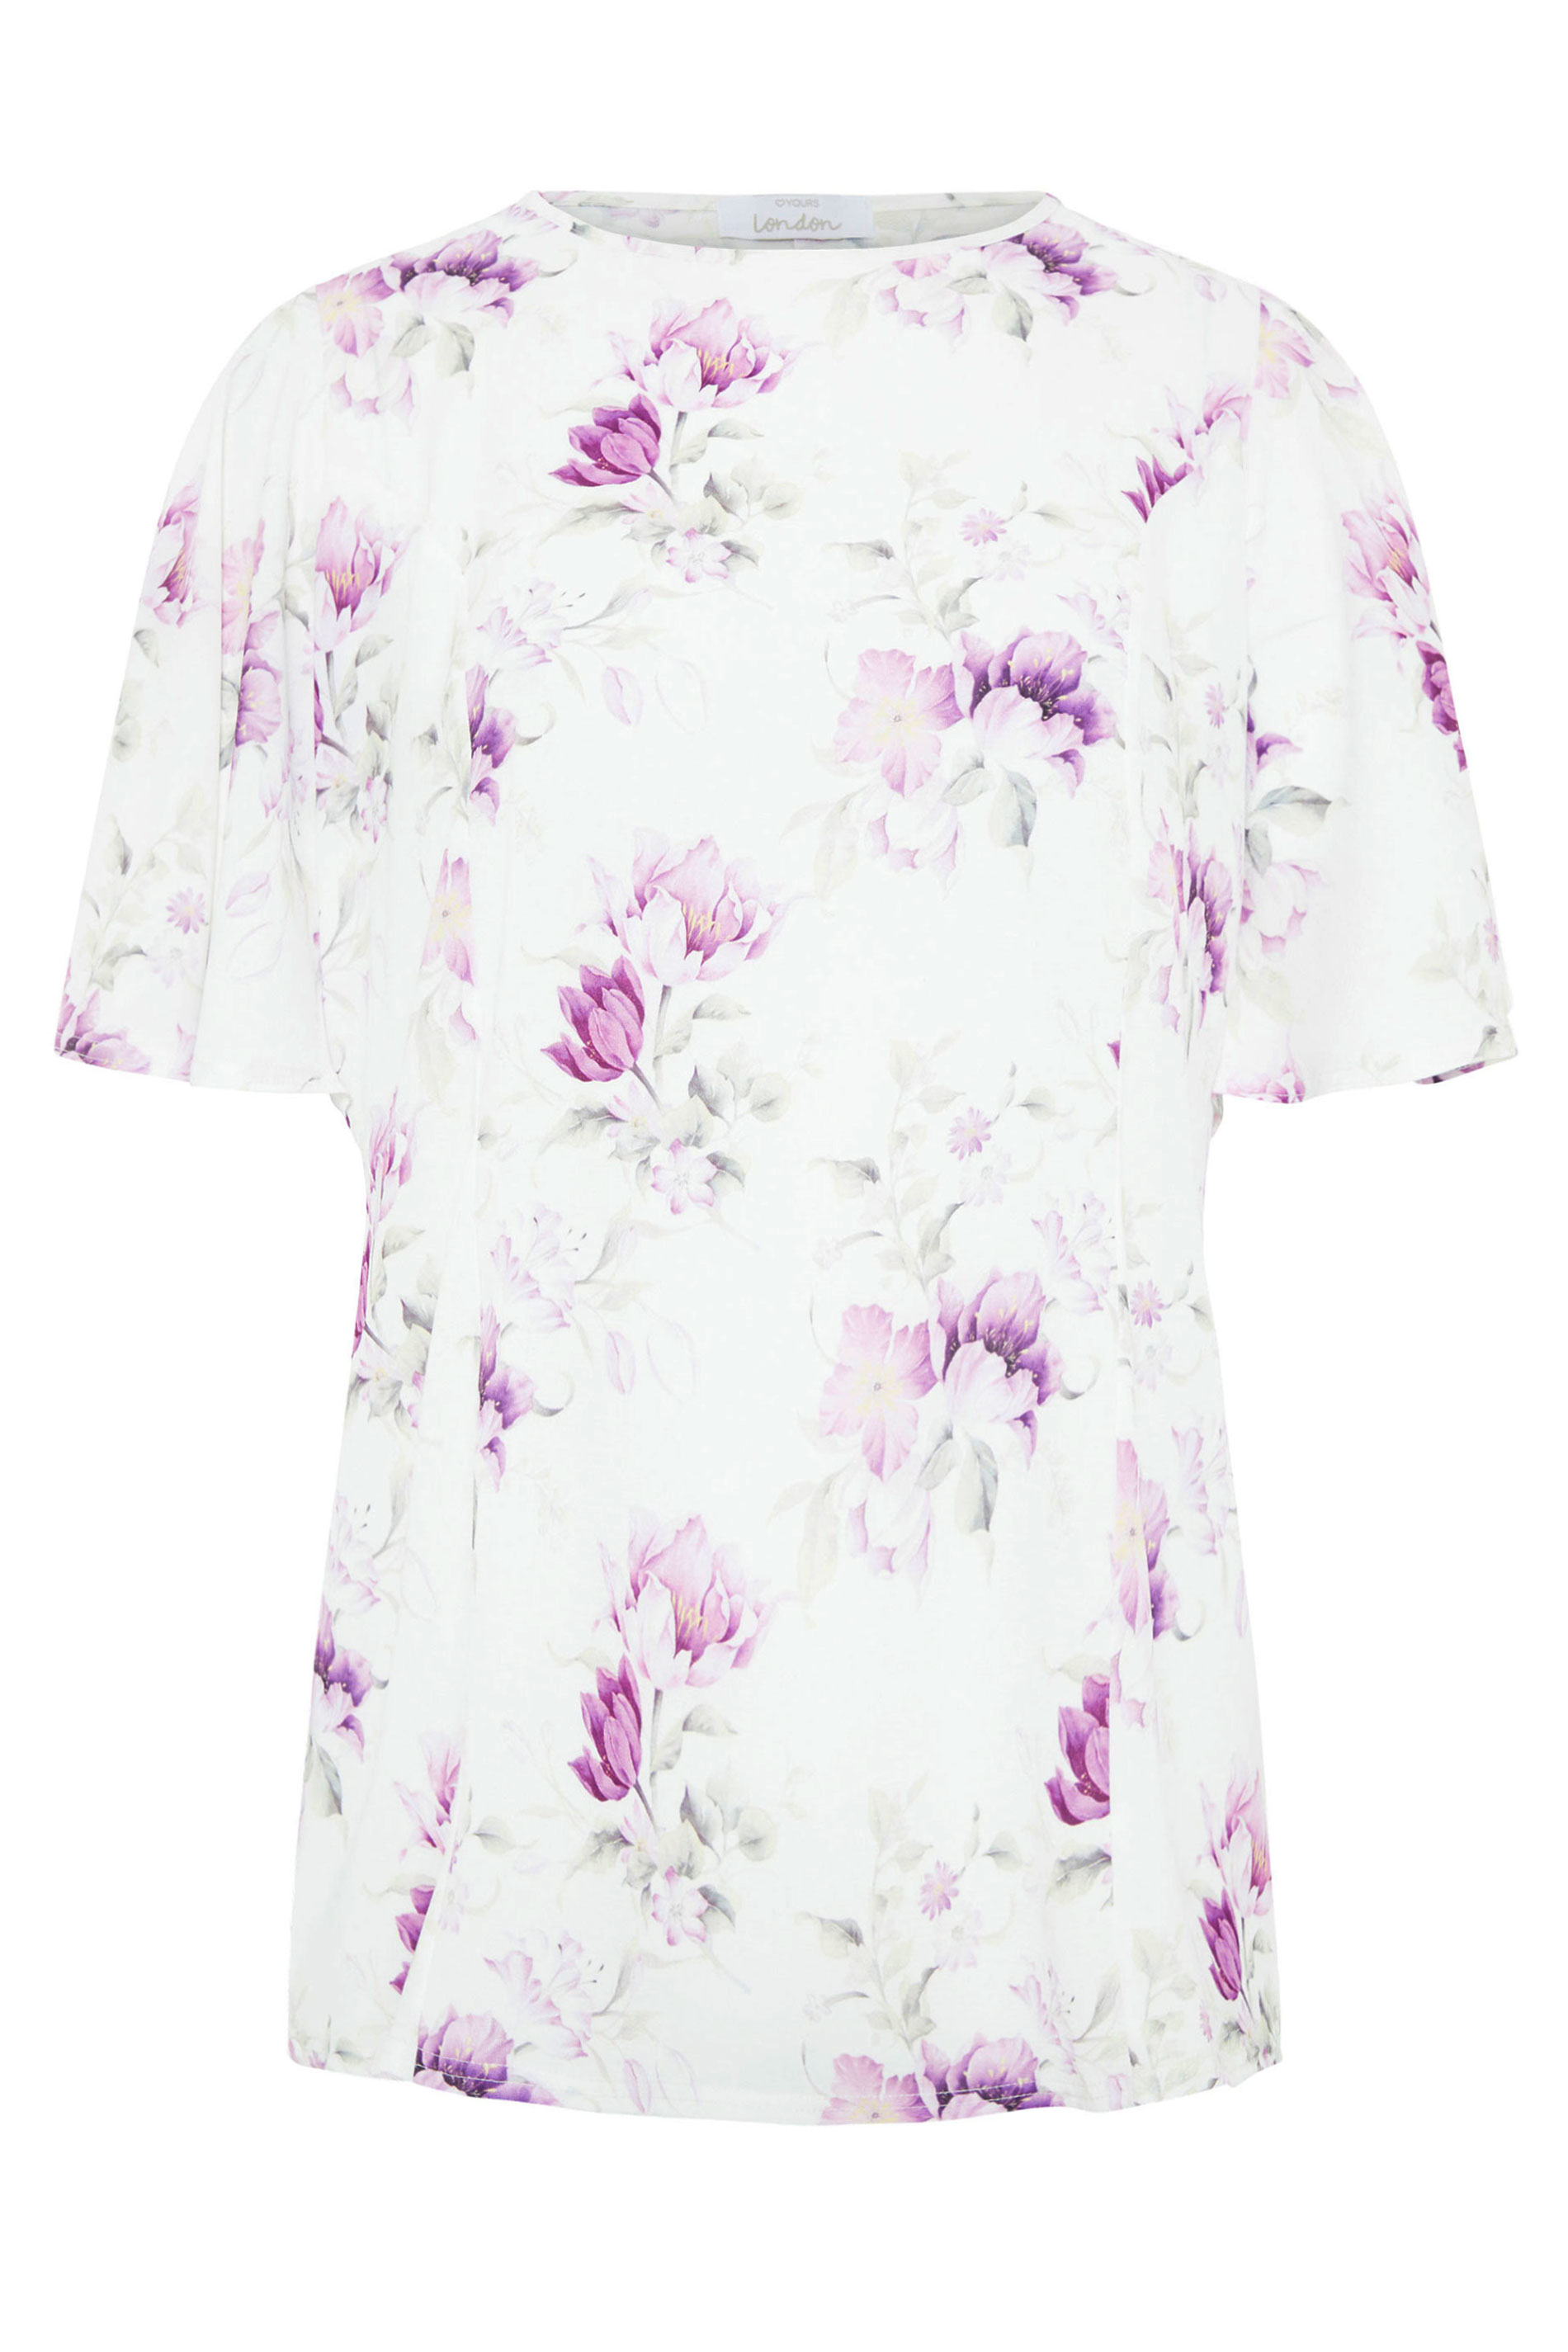 YOURS LONDON White Floral Blouse | Yours Clothing